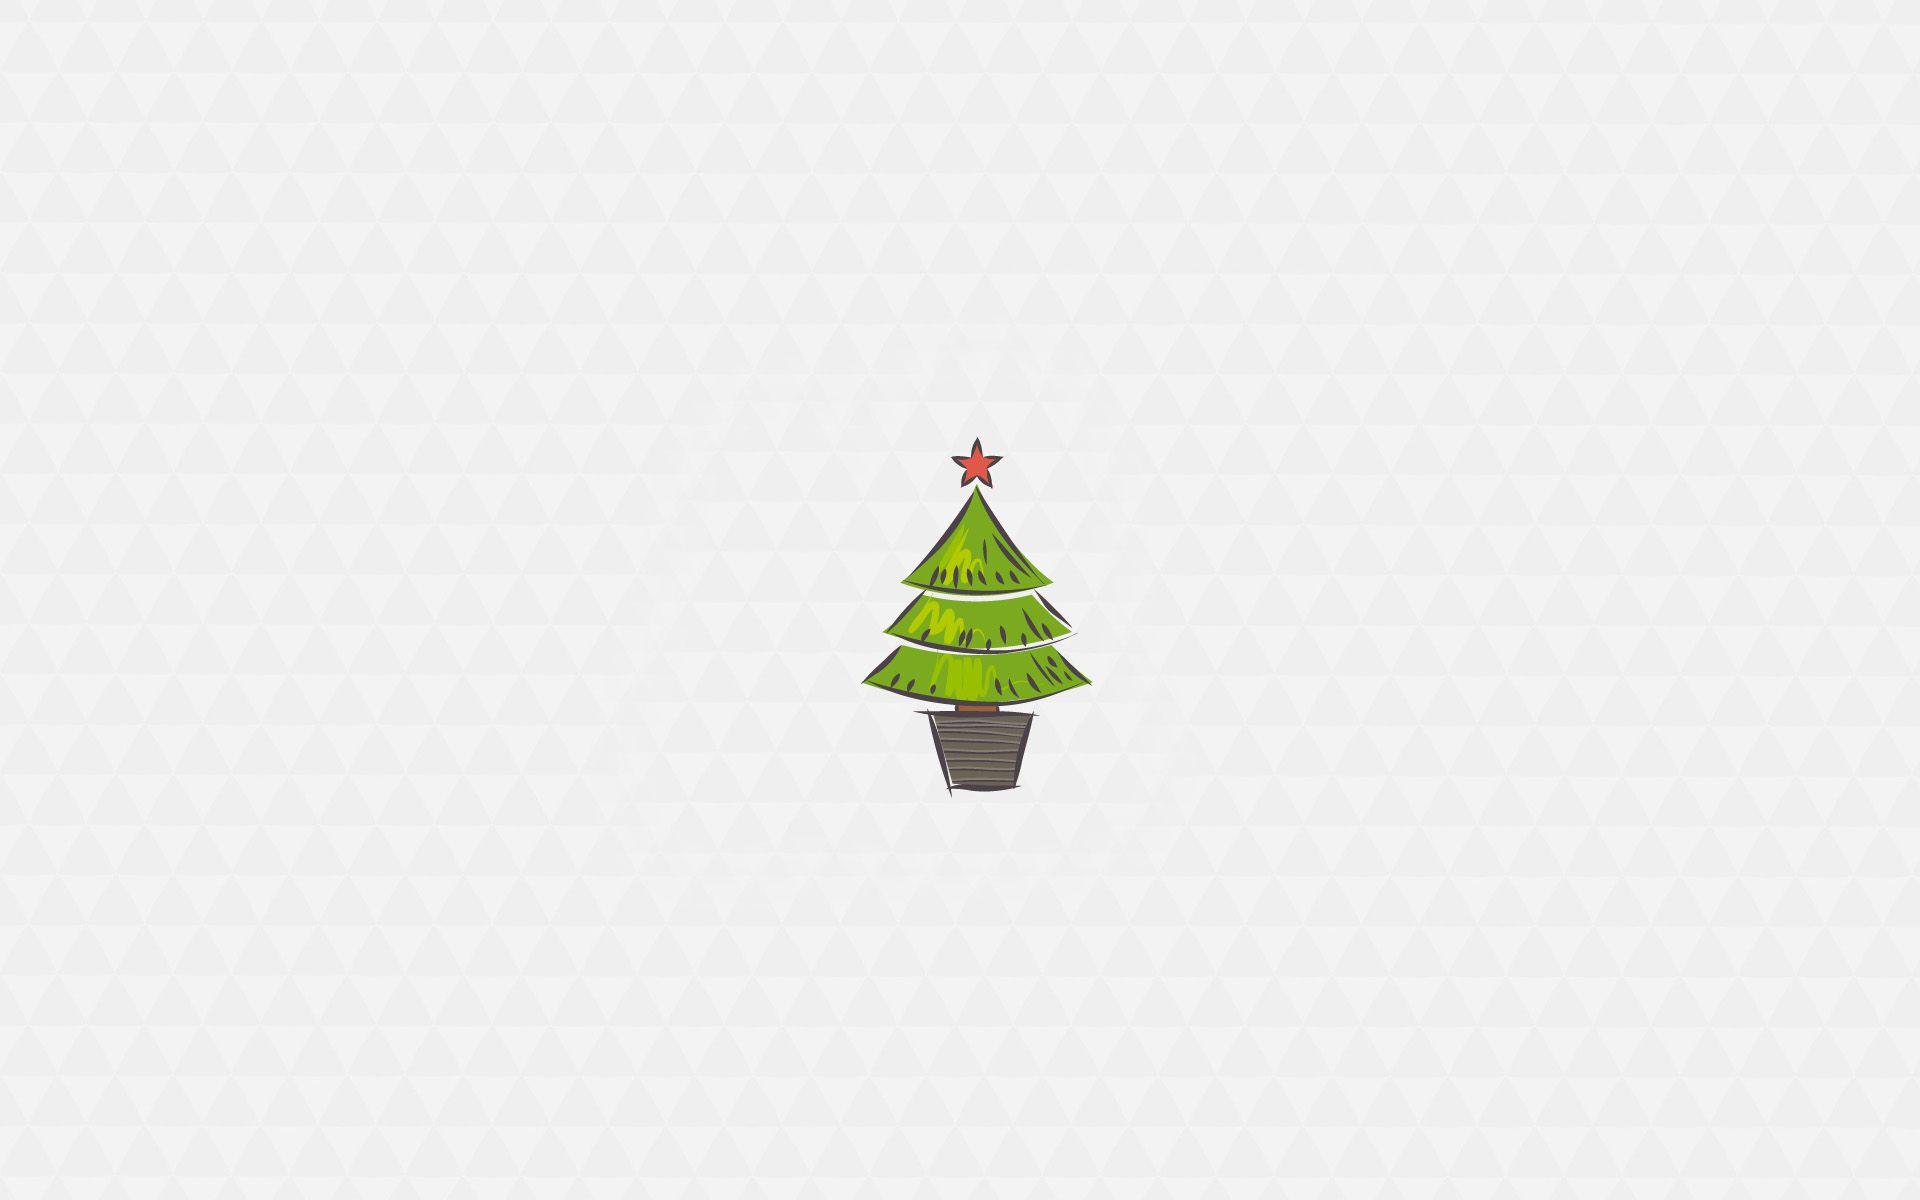 Christmas Background Images  Free iPhone  Zoom HD Wallpapers  Vectors   rawpixel